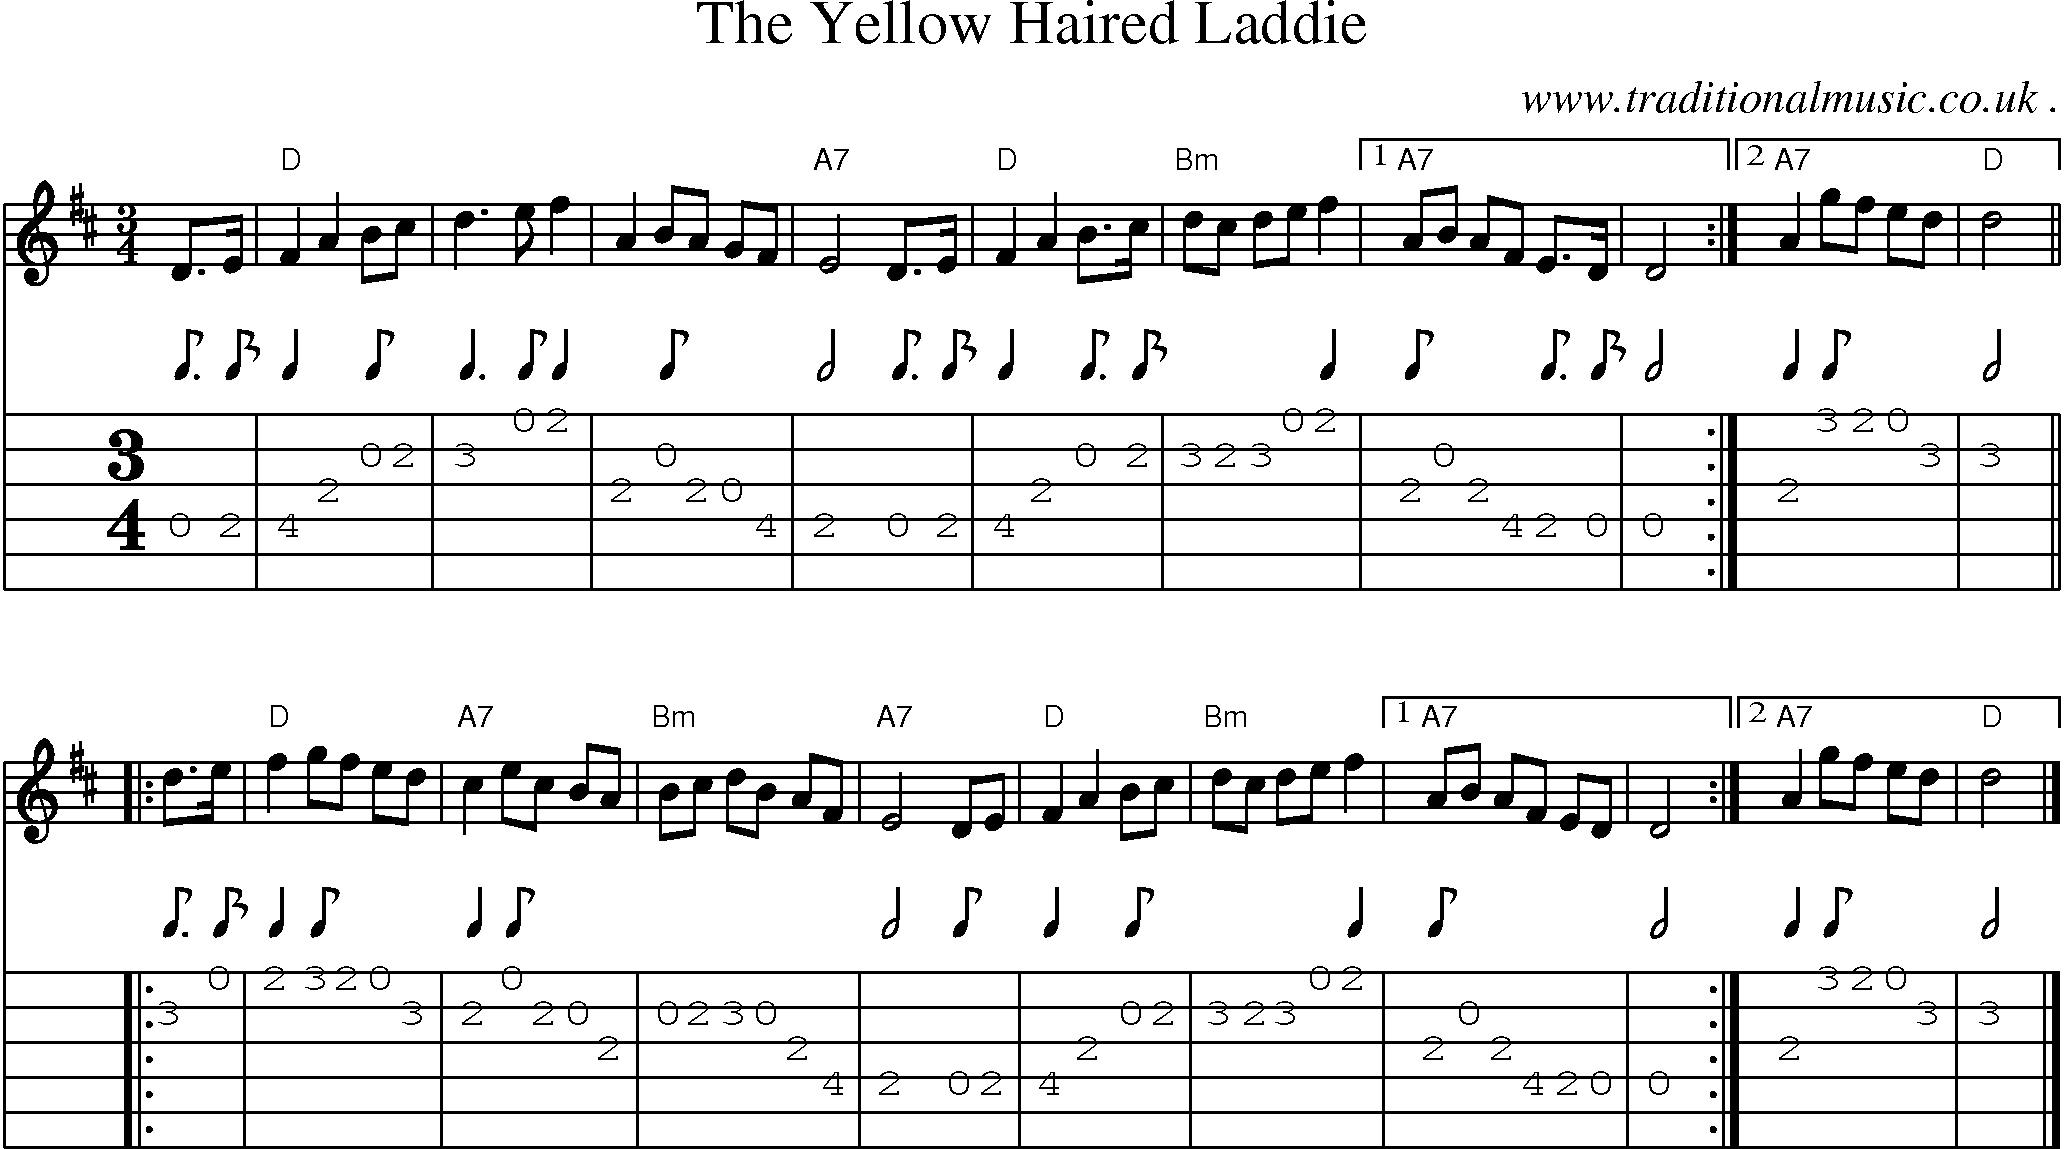 Sheet-music  score, Chords and Guitar Tabs for The Yellow Haired Laddie